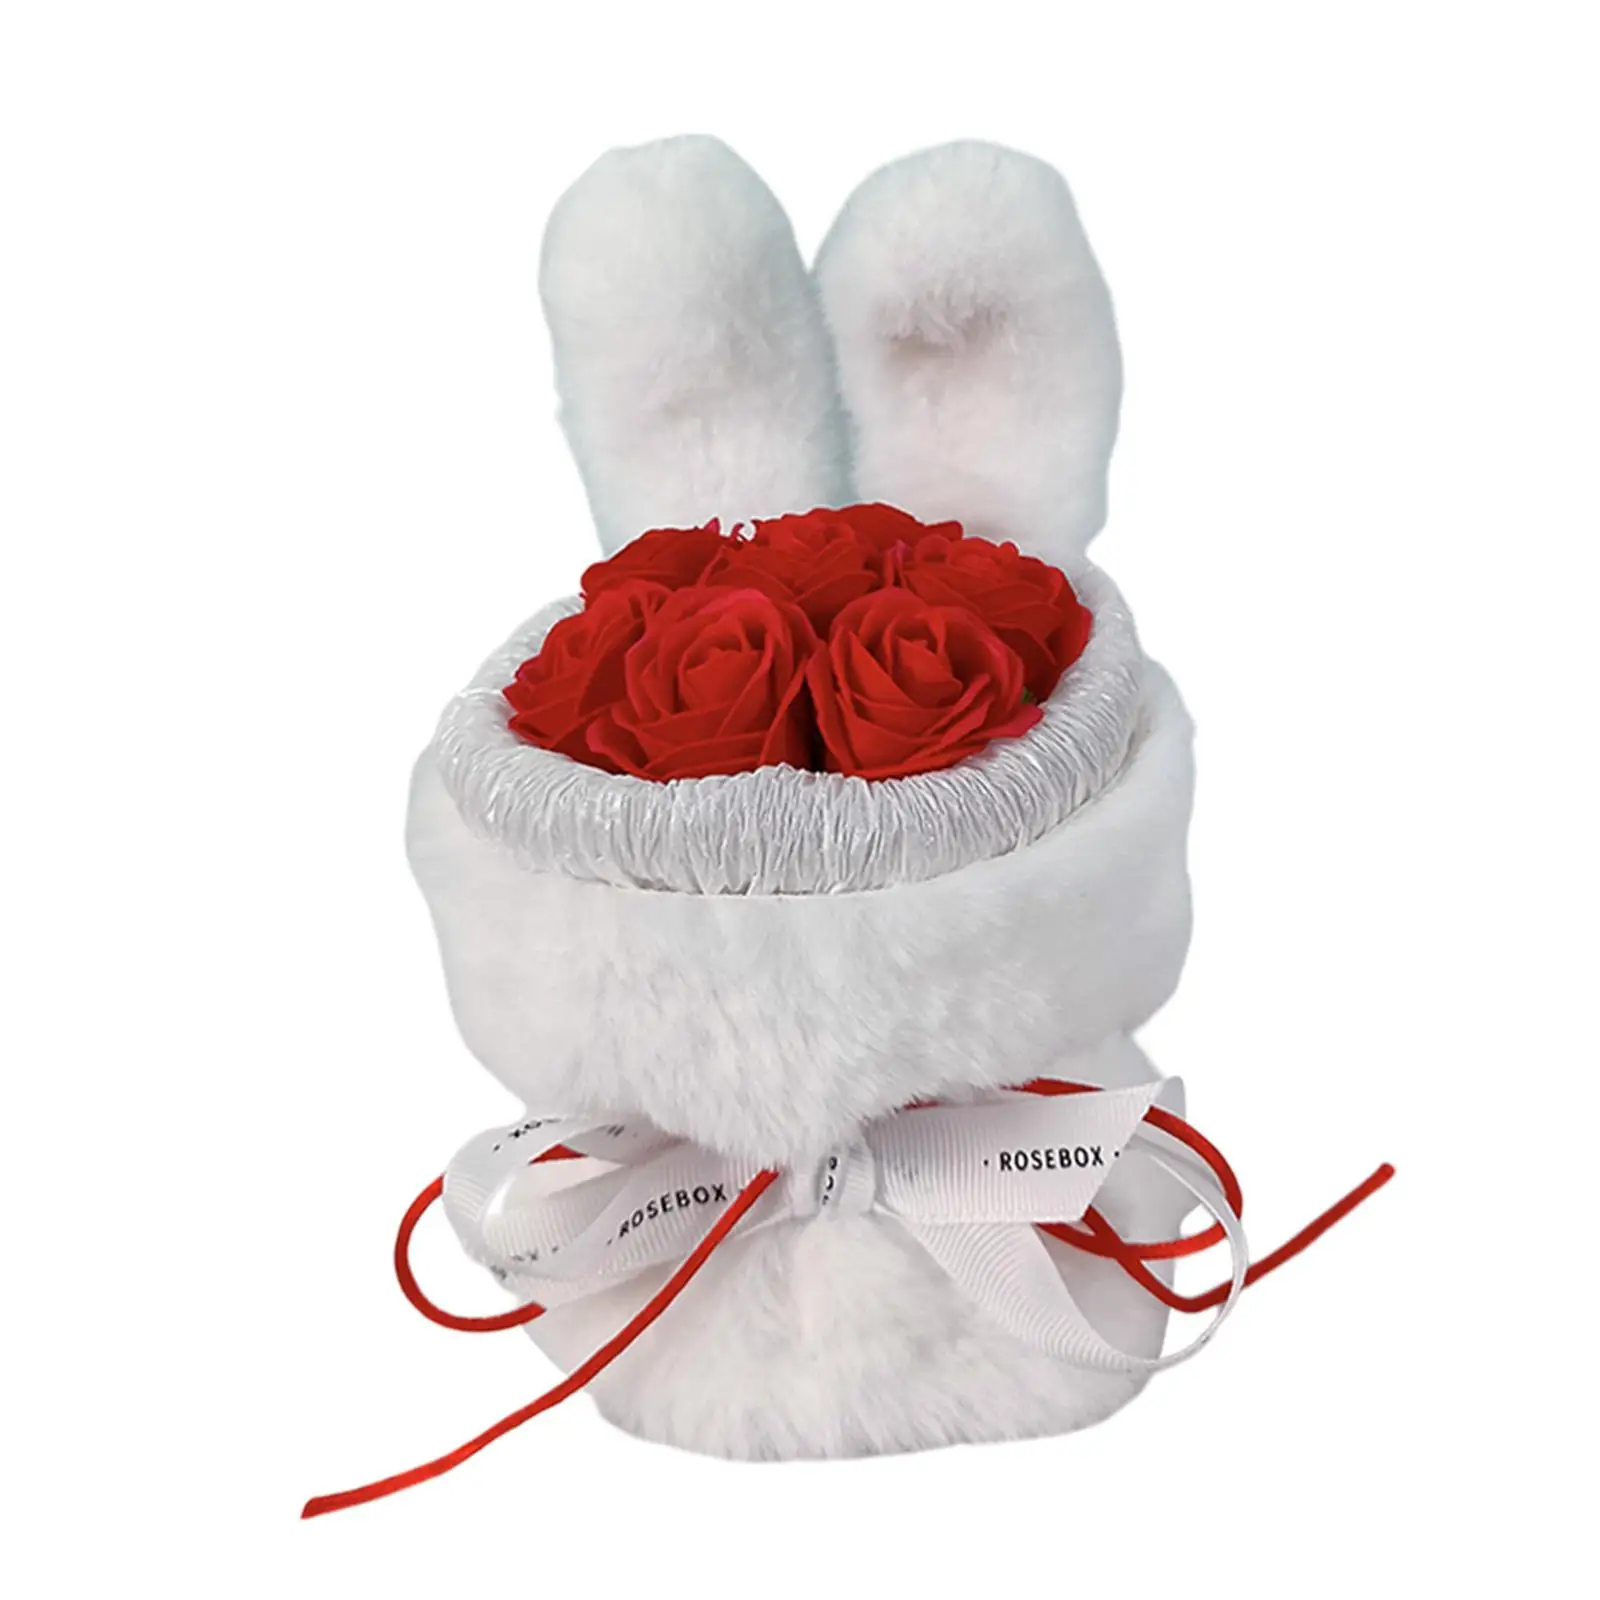 Soap Rose Flower Bath Soap rabbit Shaped Artificial Flower Bouquet for Birthday Wedding Party mother Day Decoration